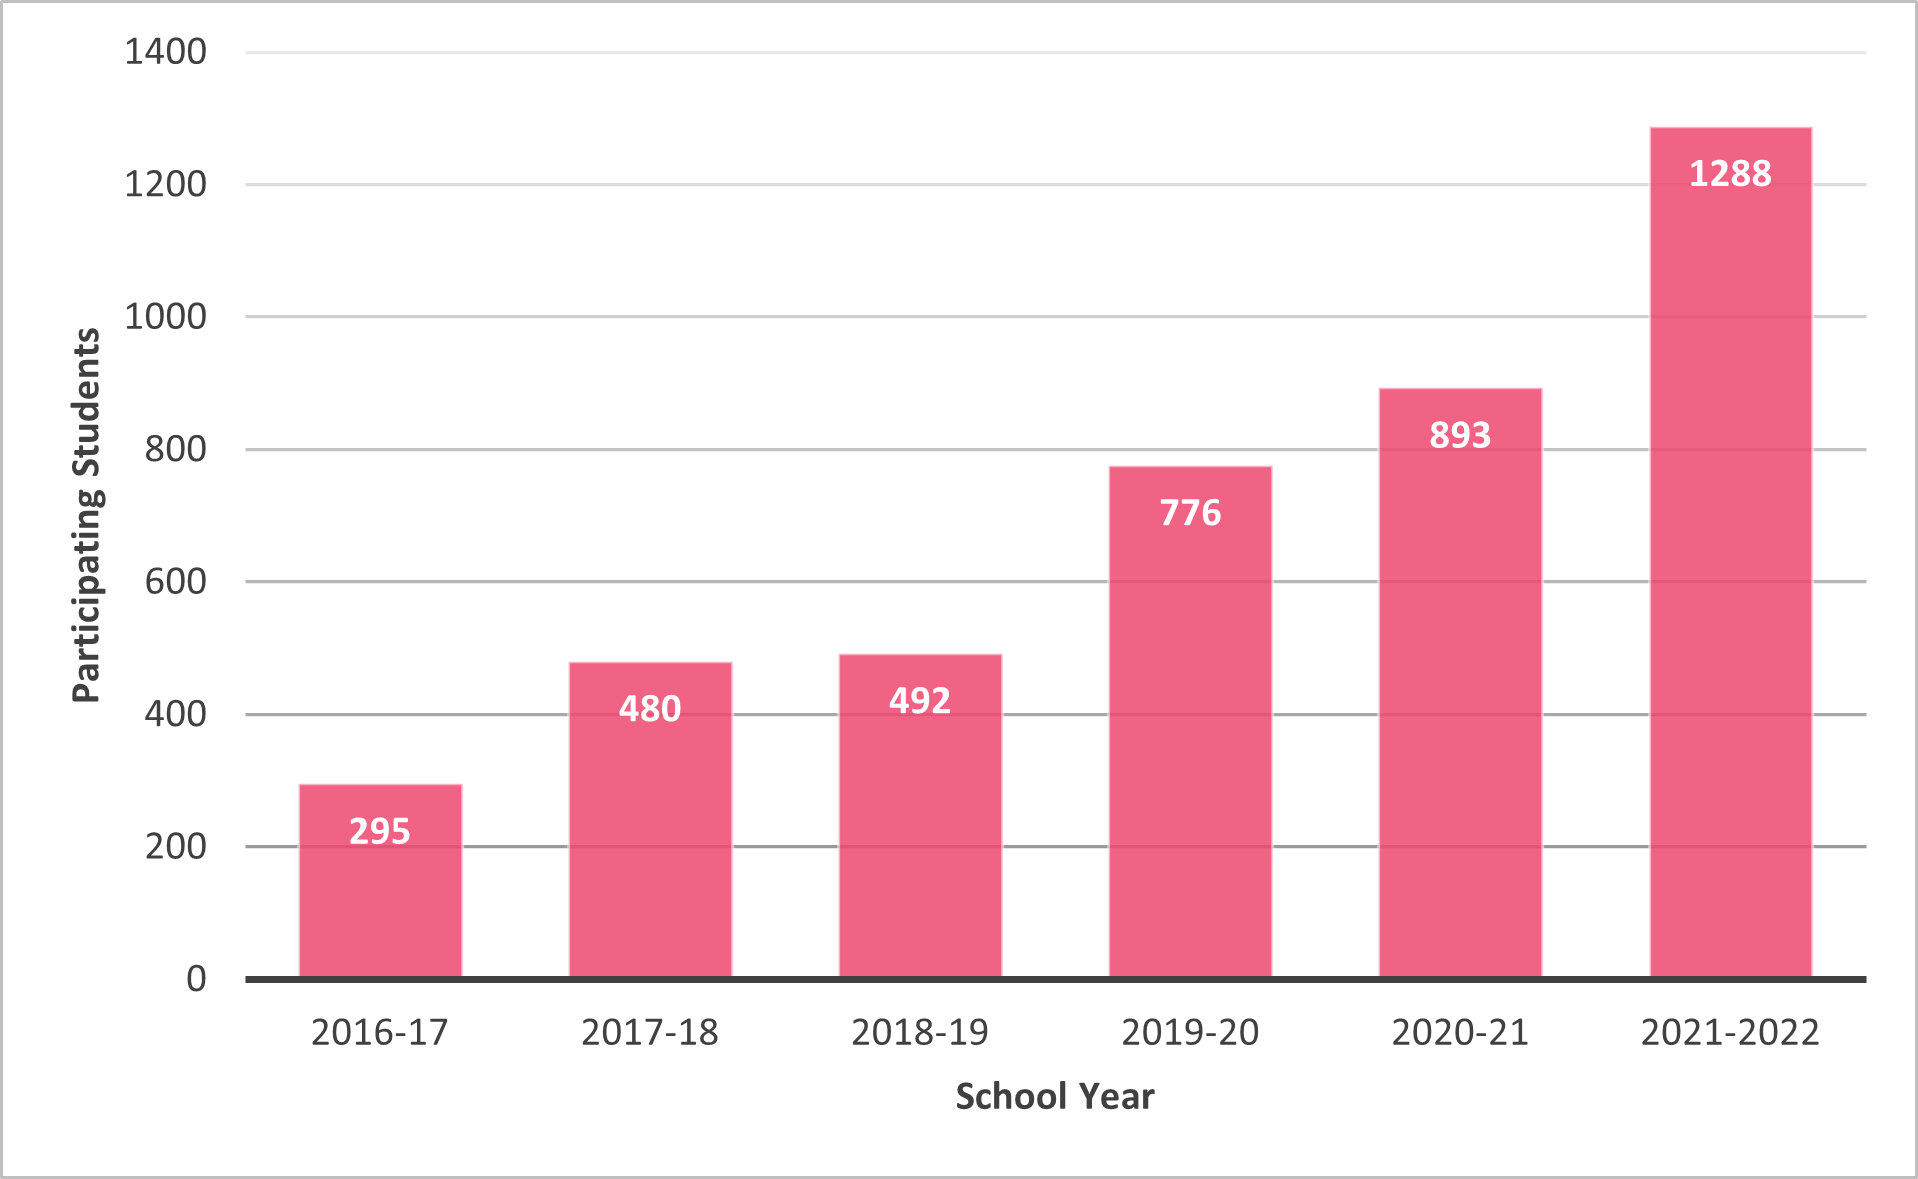 Chart showing the number of participating students each year